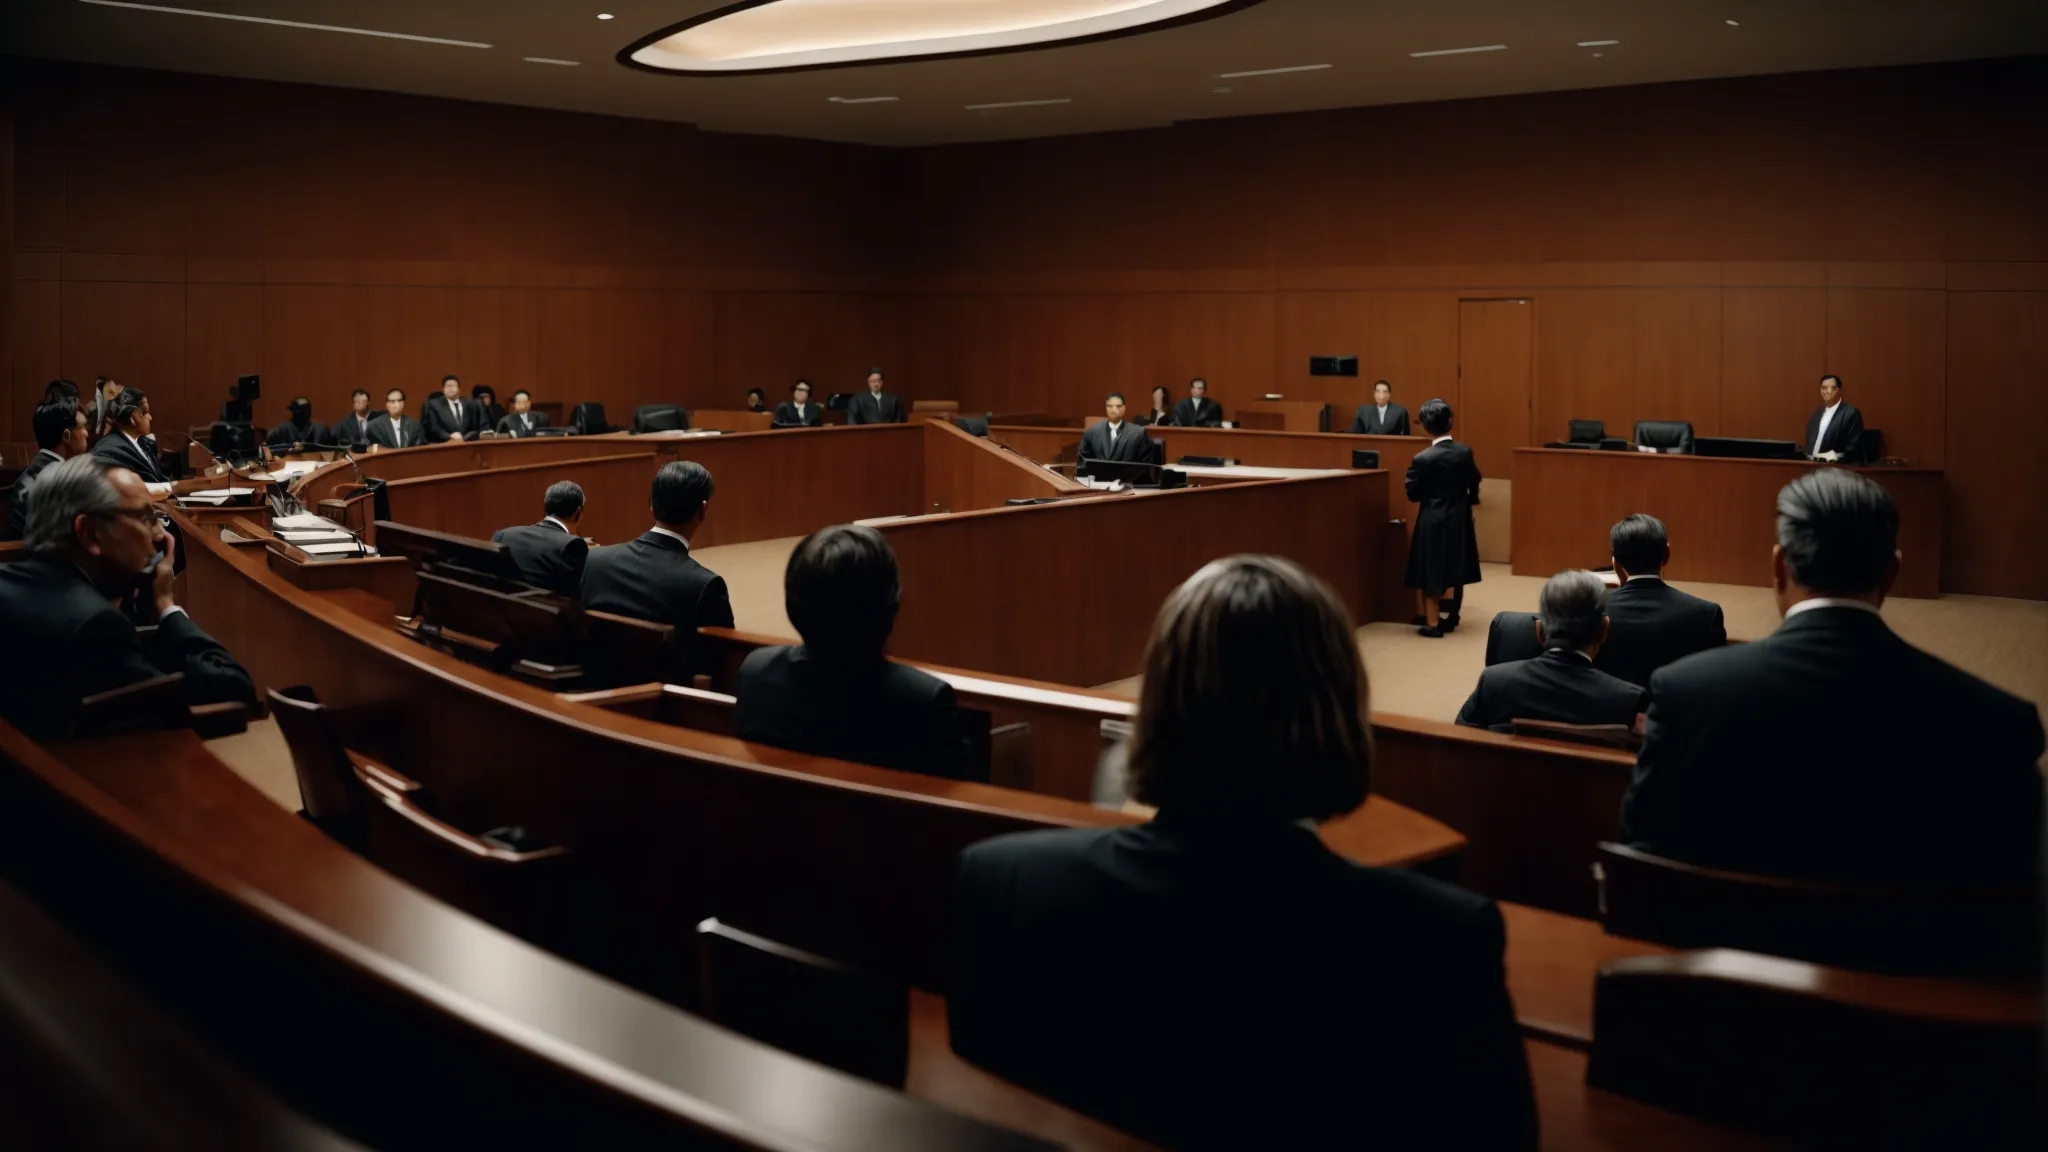 a wide angle view of a somber courtroom with a focused attorney speaking to a judge, symbolizing legal assistance.